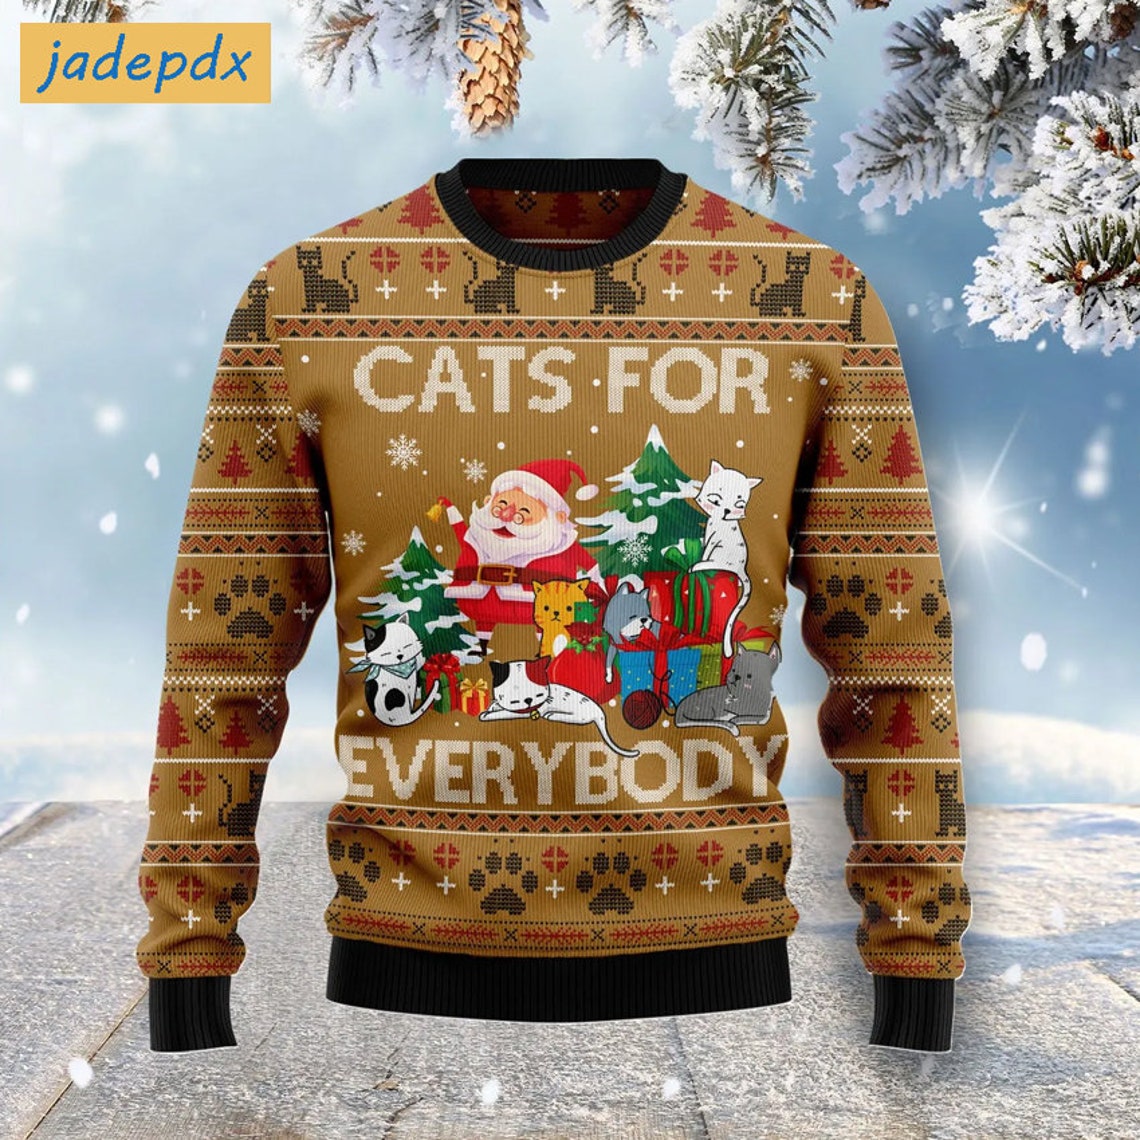 Santa Claus Cats For Everybody Christmas Ugly Sweater